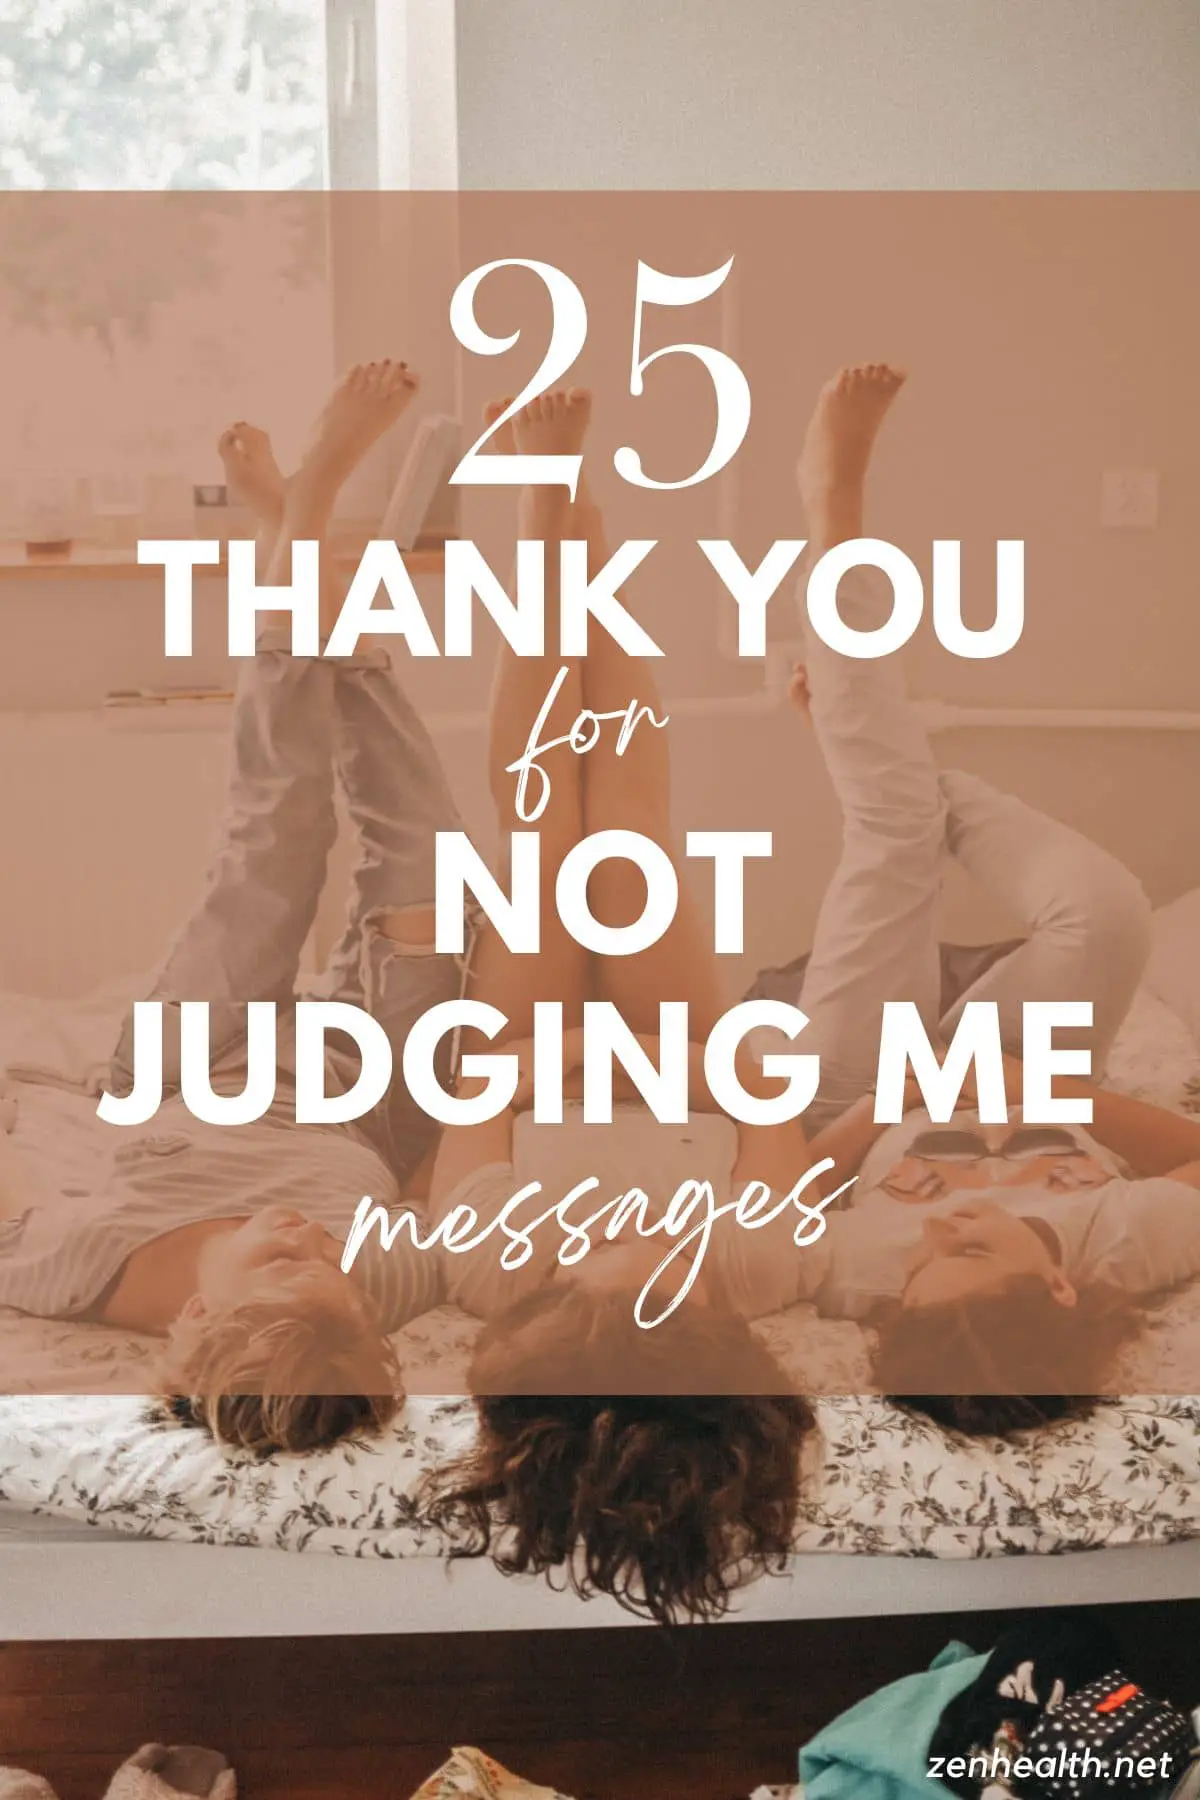 "25 thank you for not judging me messages" text overlay on a photo of 3 women lying on a bed chatting with their legs in the air